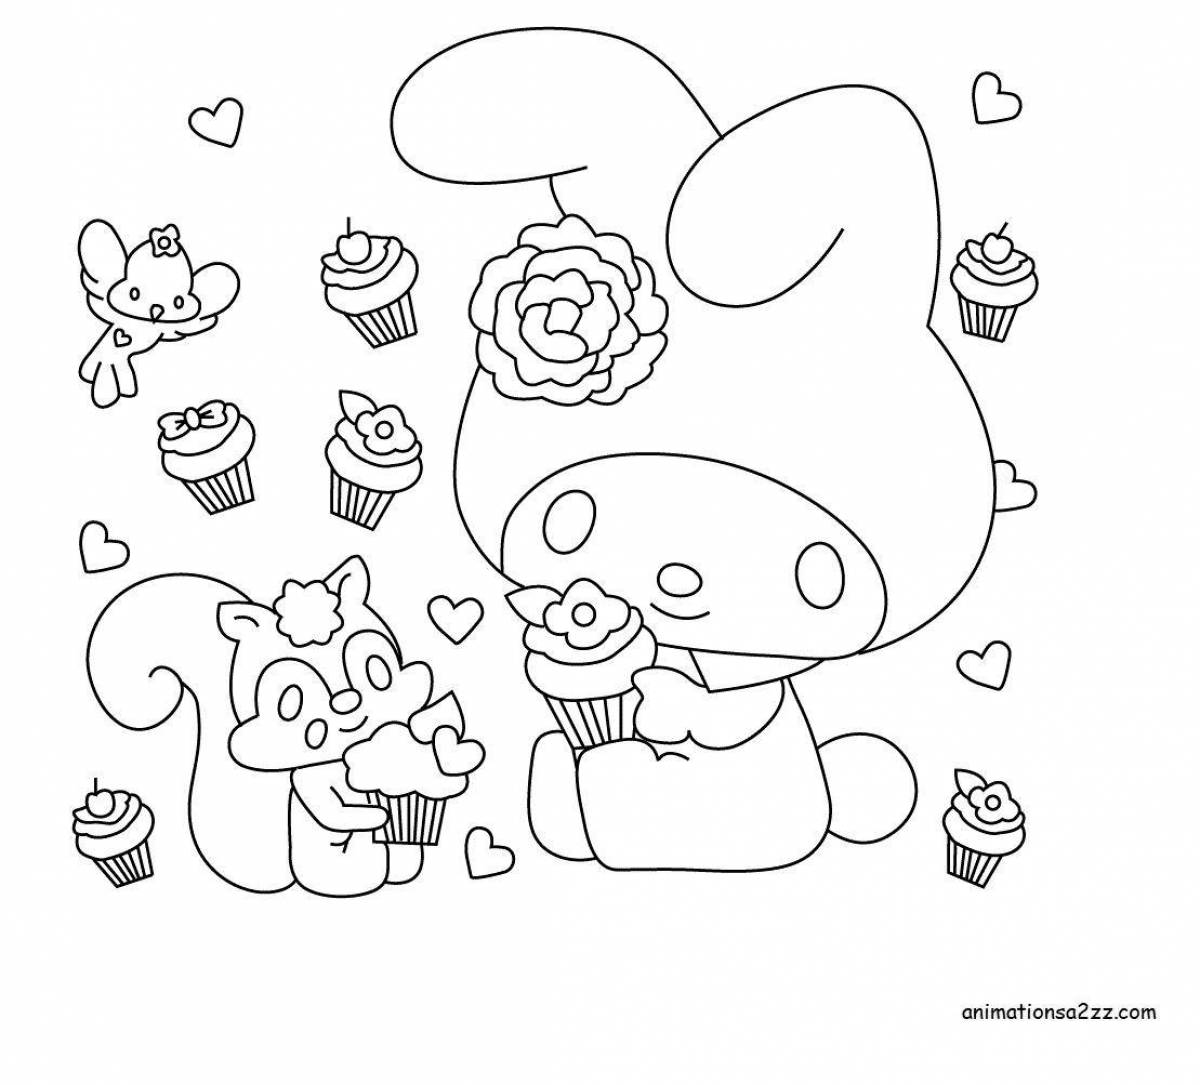 Fairy kuromi a lot coloring page